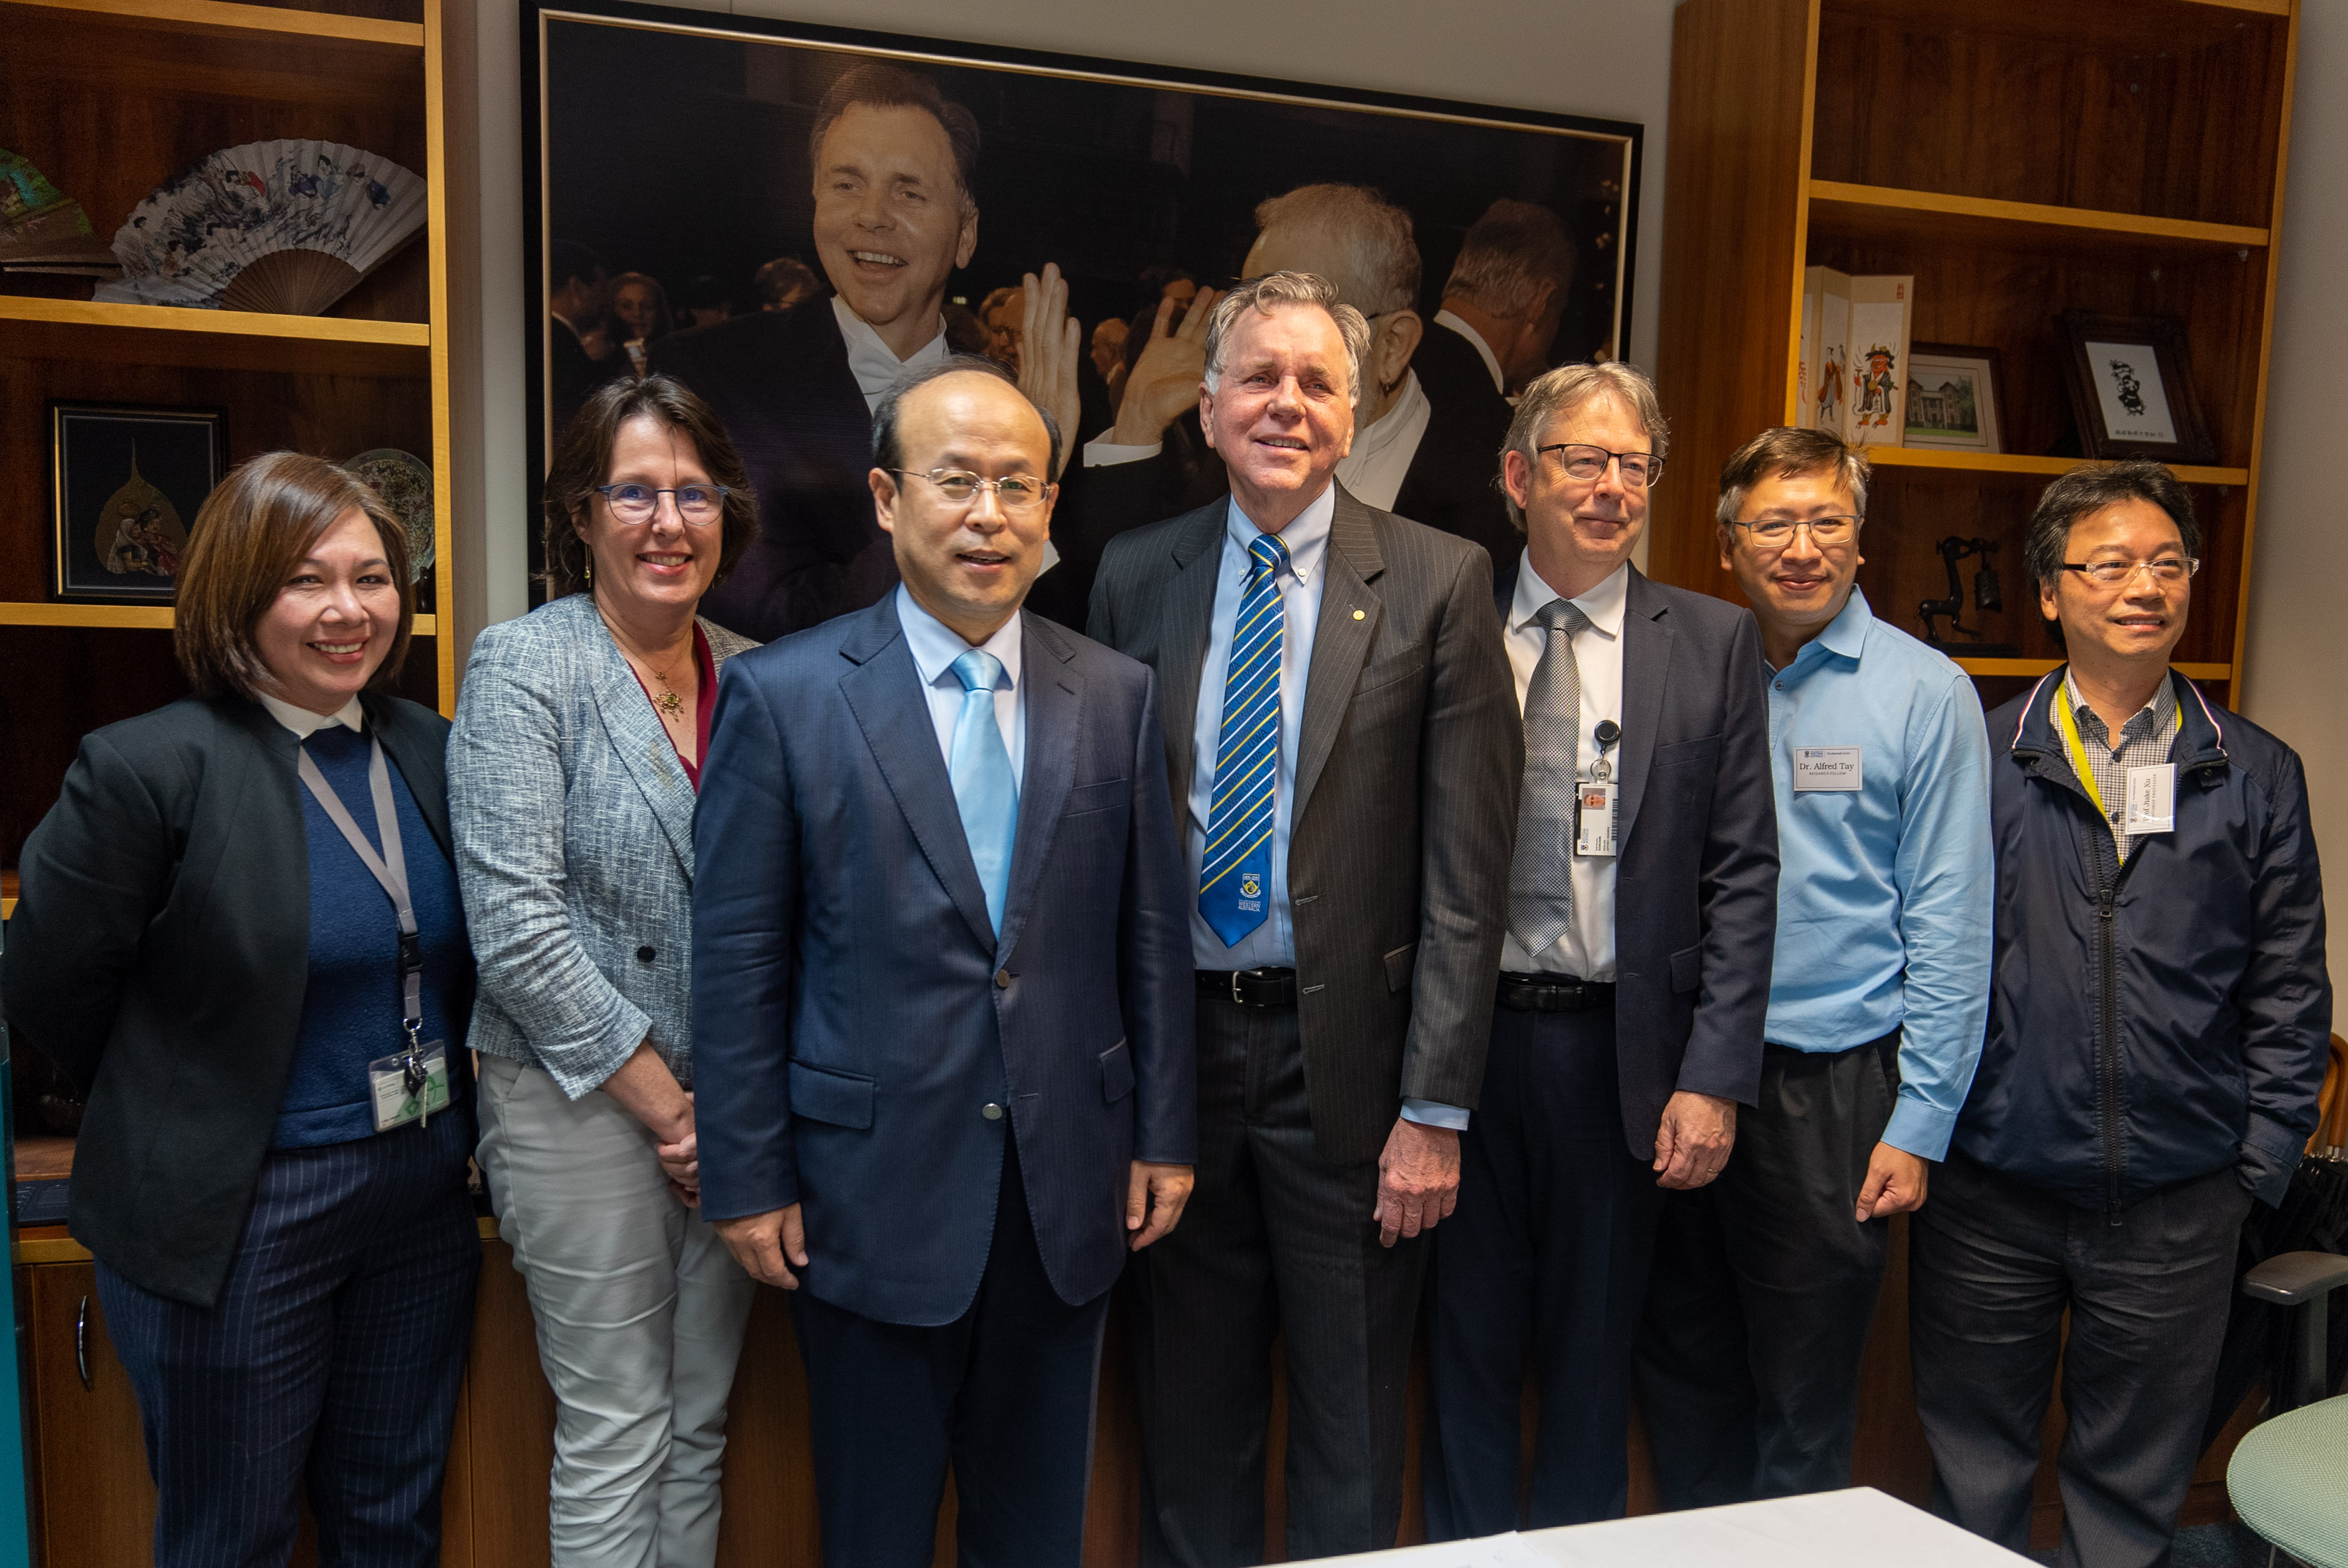 The Chinese Ambassador of Australia along side The Marshall Centre Faculty; Liz Fu (left), Charlene Kahler (left), Chinese Ambassador Xiao Qian (middle) , Professor Barry Marshall (middle), Professor Jeff Keelan (right), Dr Alfred Tay (right), Professor Jiake Xu (left)